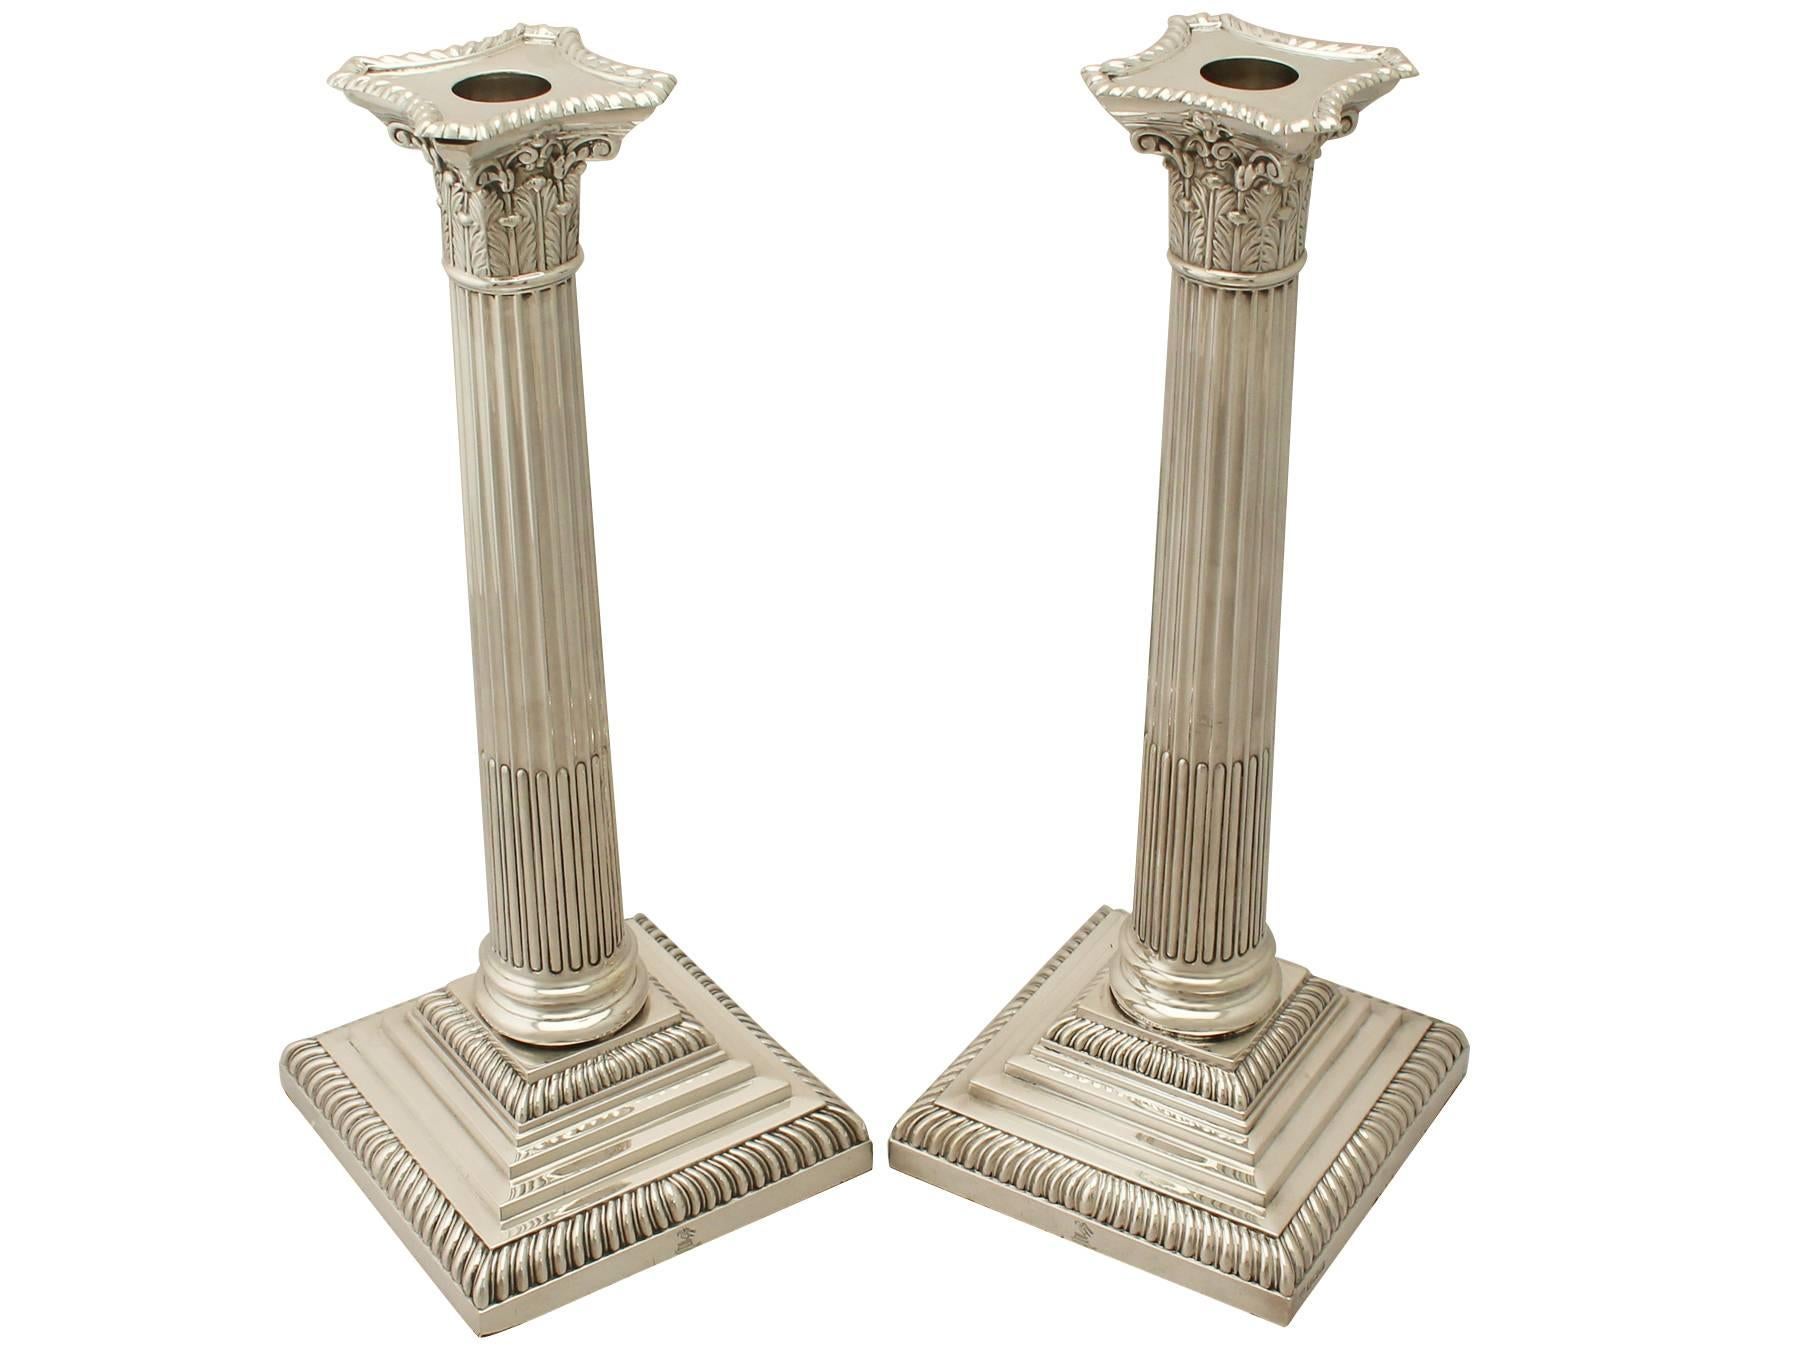 A magnificent, fine and impressive, large pair of antique George V English sterling silver Corinthian column candlesticks; part of our ornamental silverware collection.

Description

These exceptional antique George V sterling silver